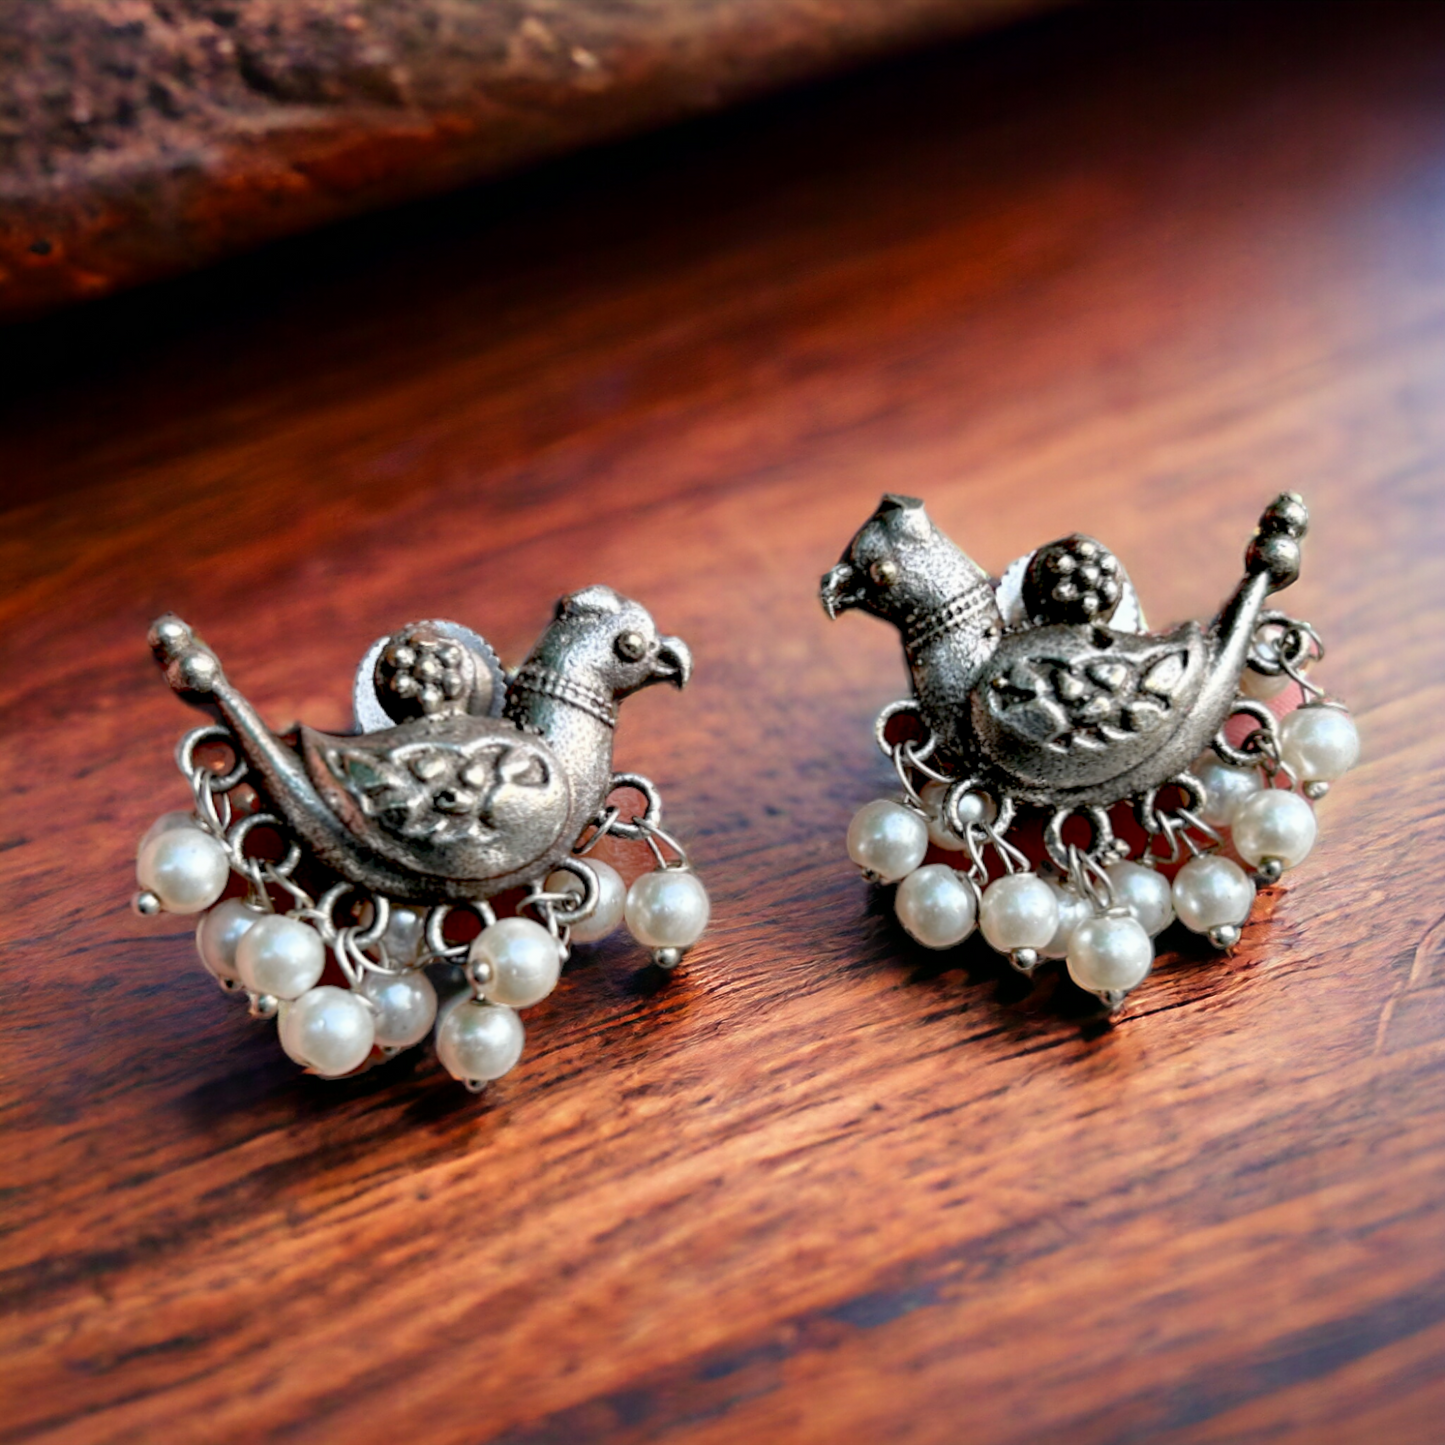 "Vyoma Avian Elegance Bird Earring – White Pearl Drops, Affordable Sophistication"